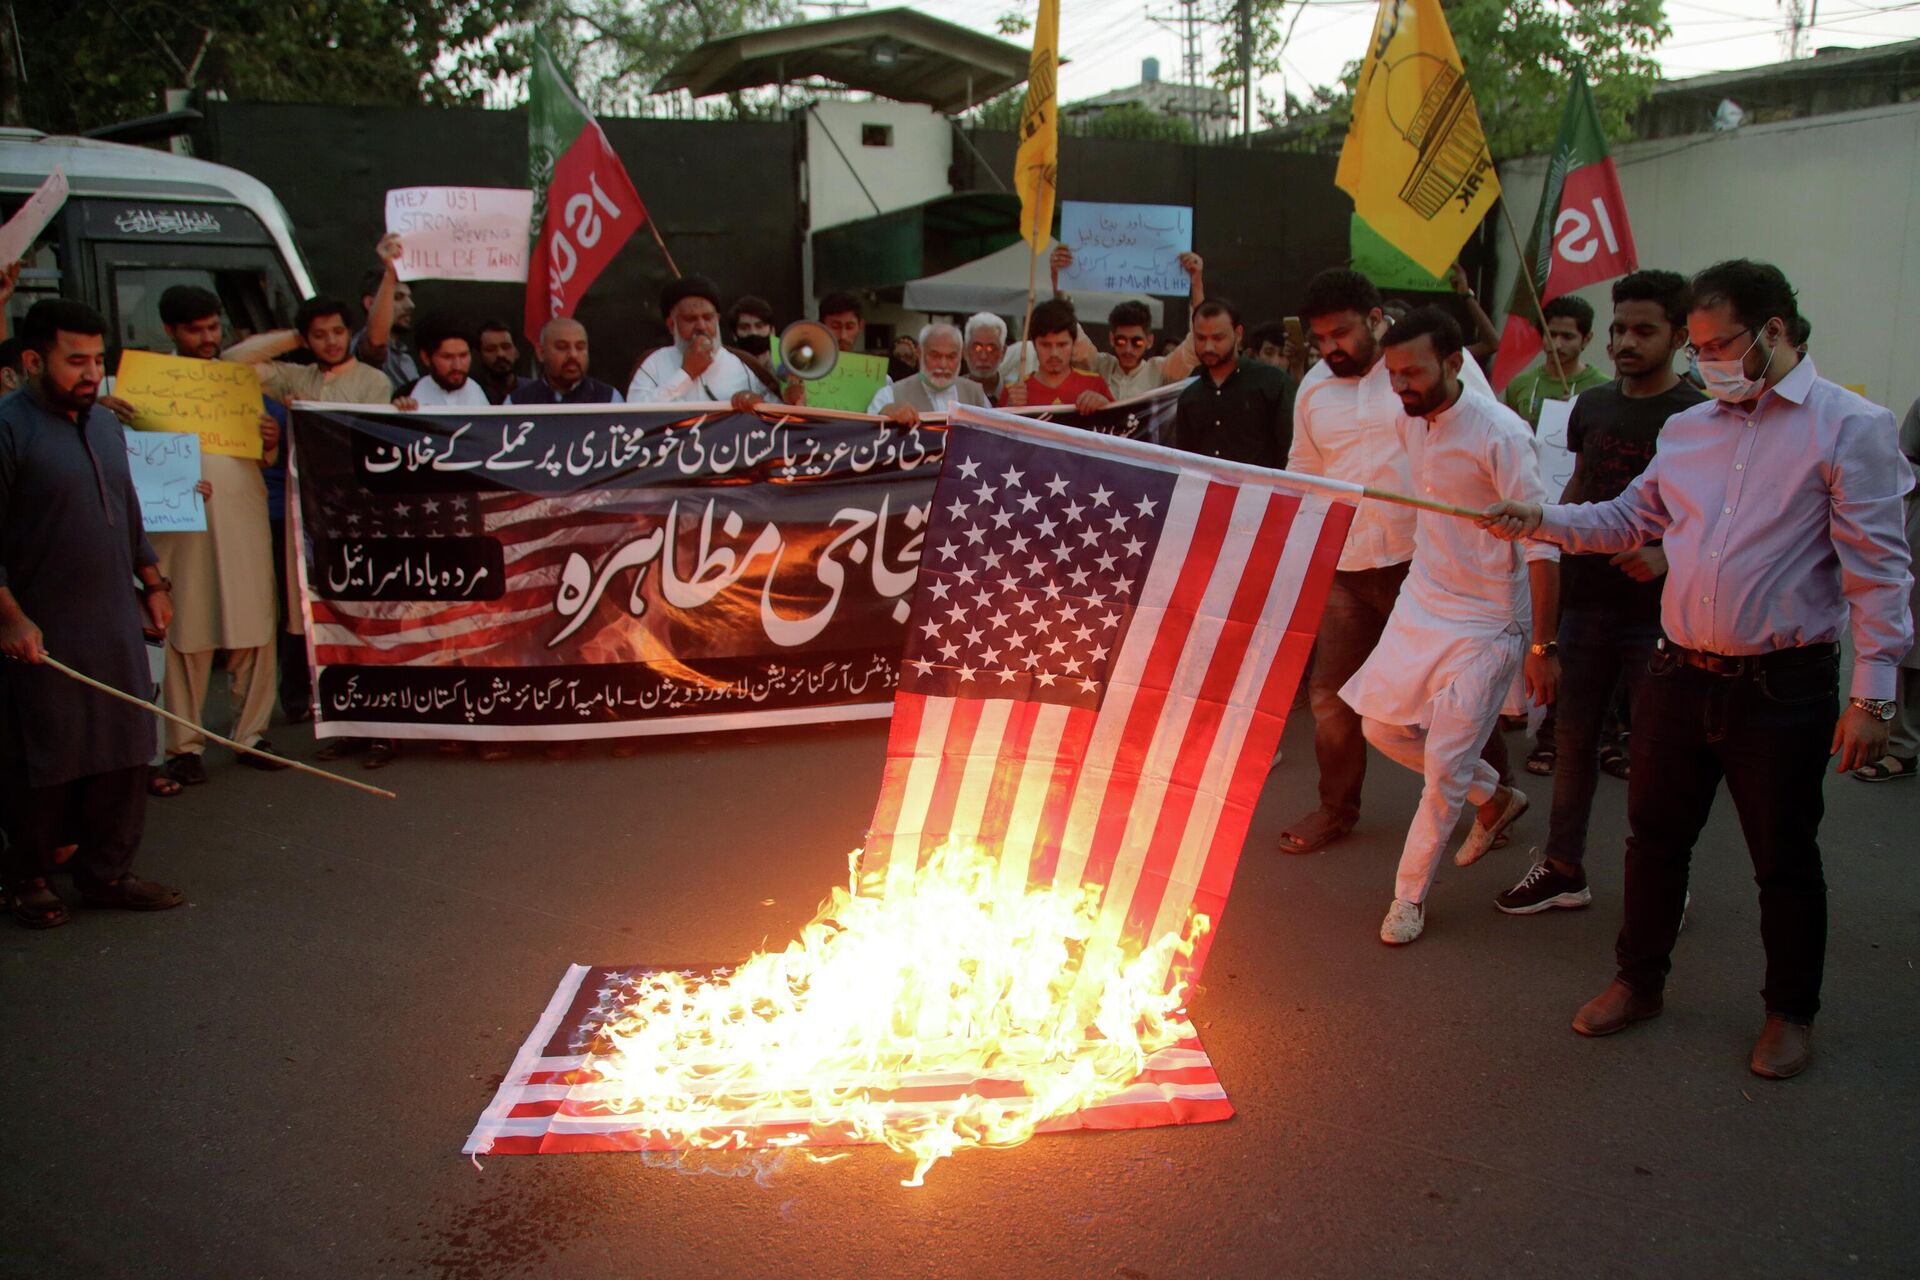 Pakistani Shiite Muslims and supporters of ruling party Pakistan Tehreek-e-Insaf burn a representation of U.S flag during an anti U.S protest, outside U.S consulate in Lahore, Pakistan, Friday, April 1, 2022. In an address to the nation on Thursday Pakistani Prime Minister Imran Khan lashed out at the United States, claiming Washington had conspired with the Pakistani opposition against him. - Sputnik International, 1920, 11.04.2022